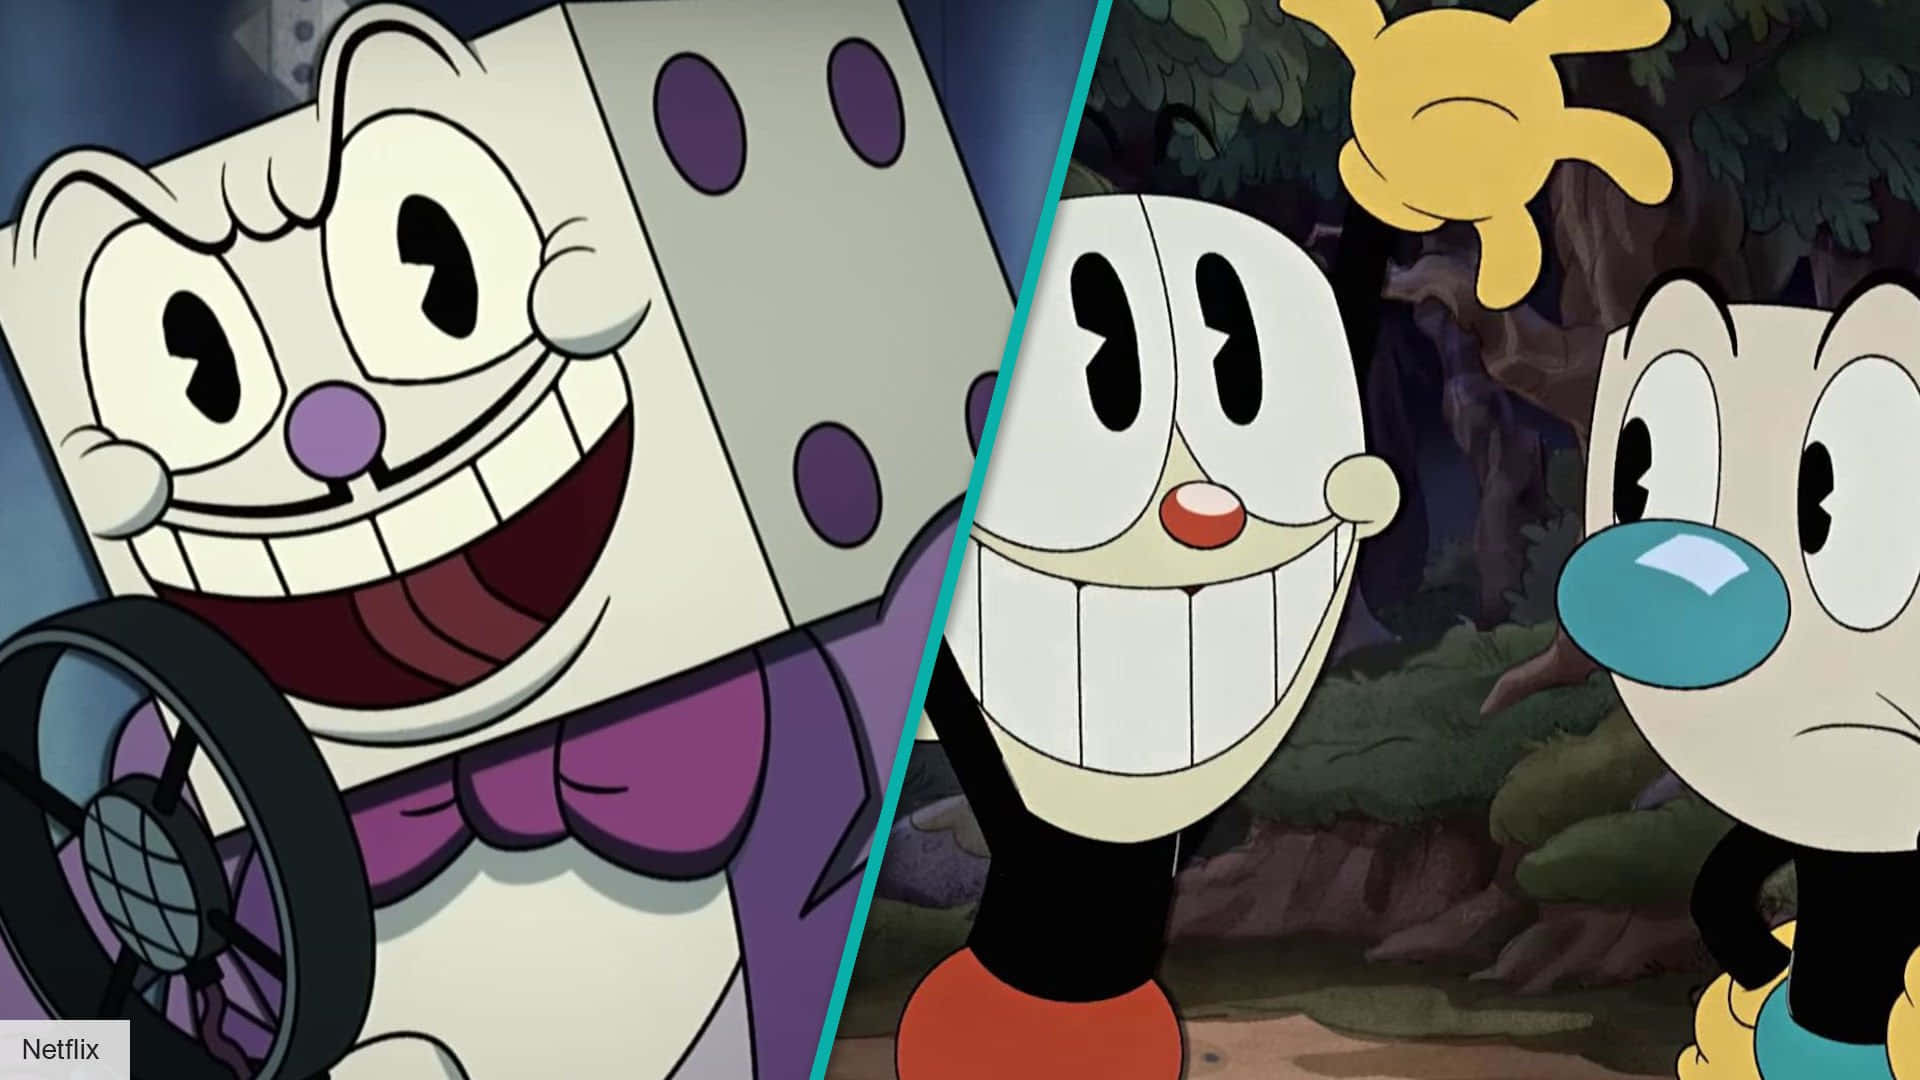 Cuphead battles his way with weapon raised